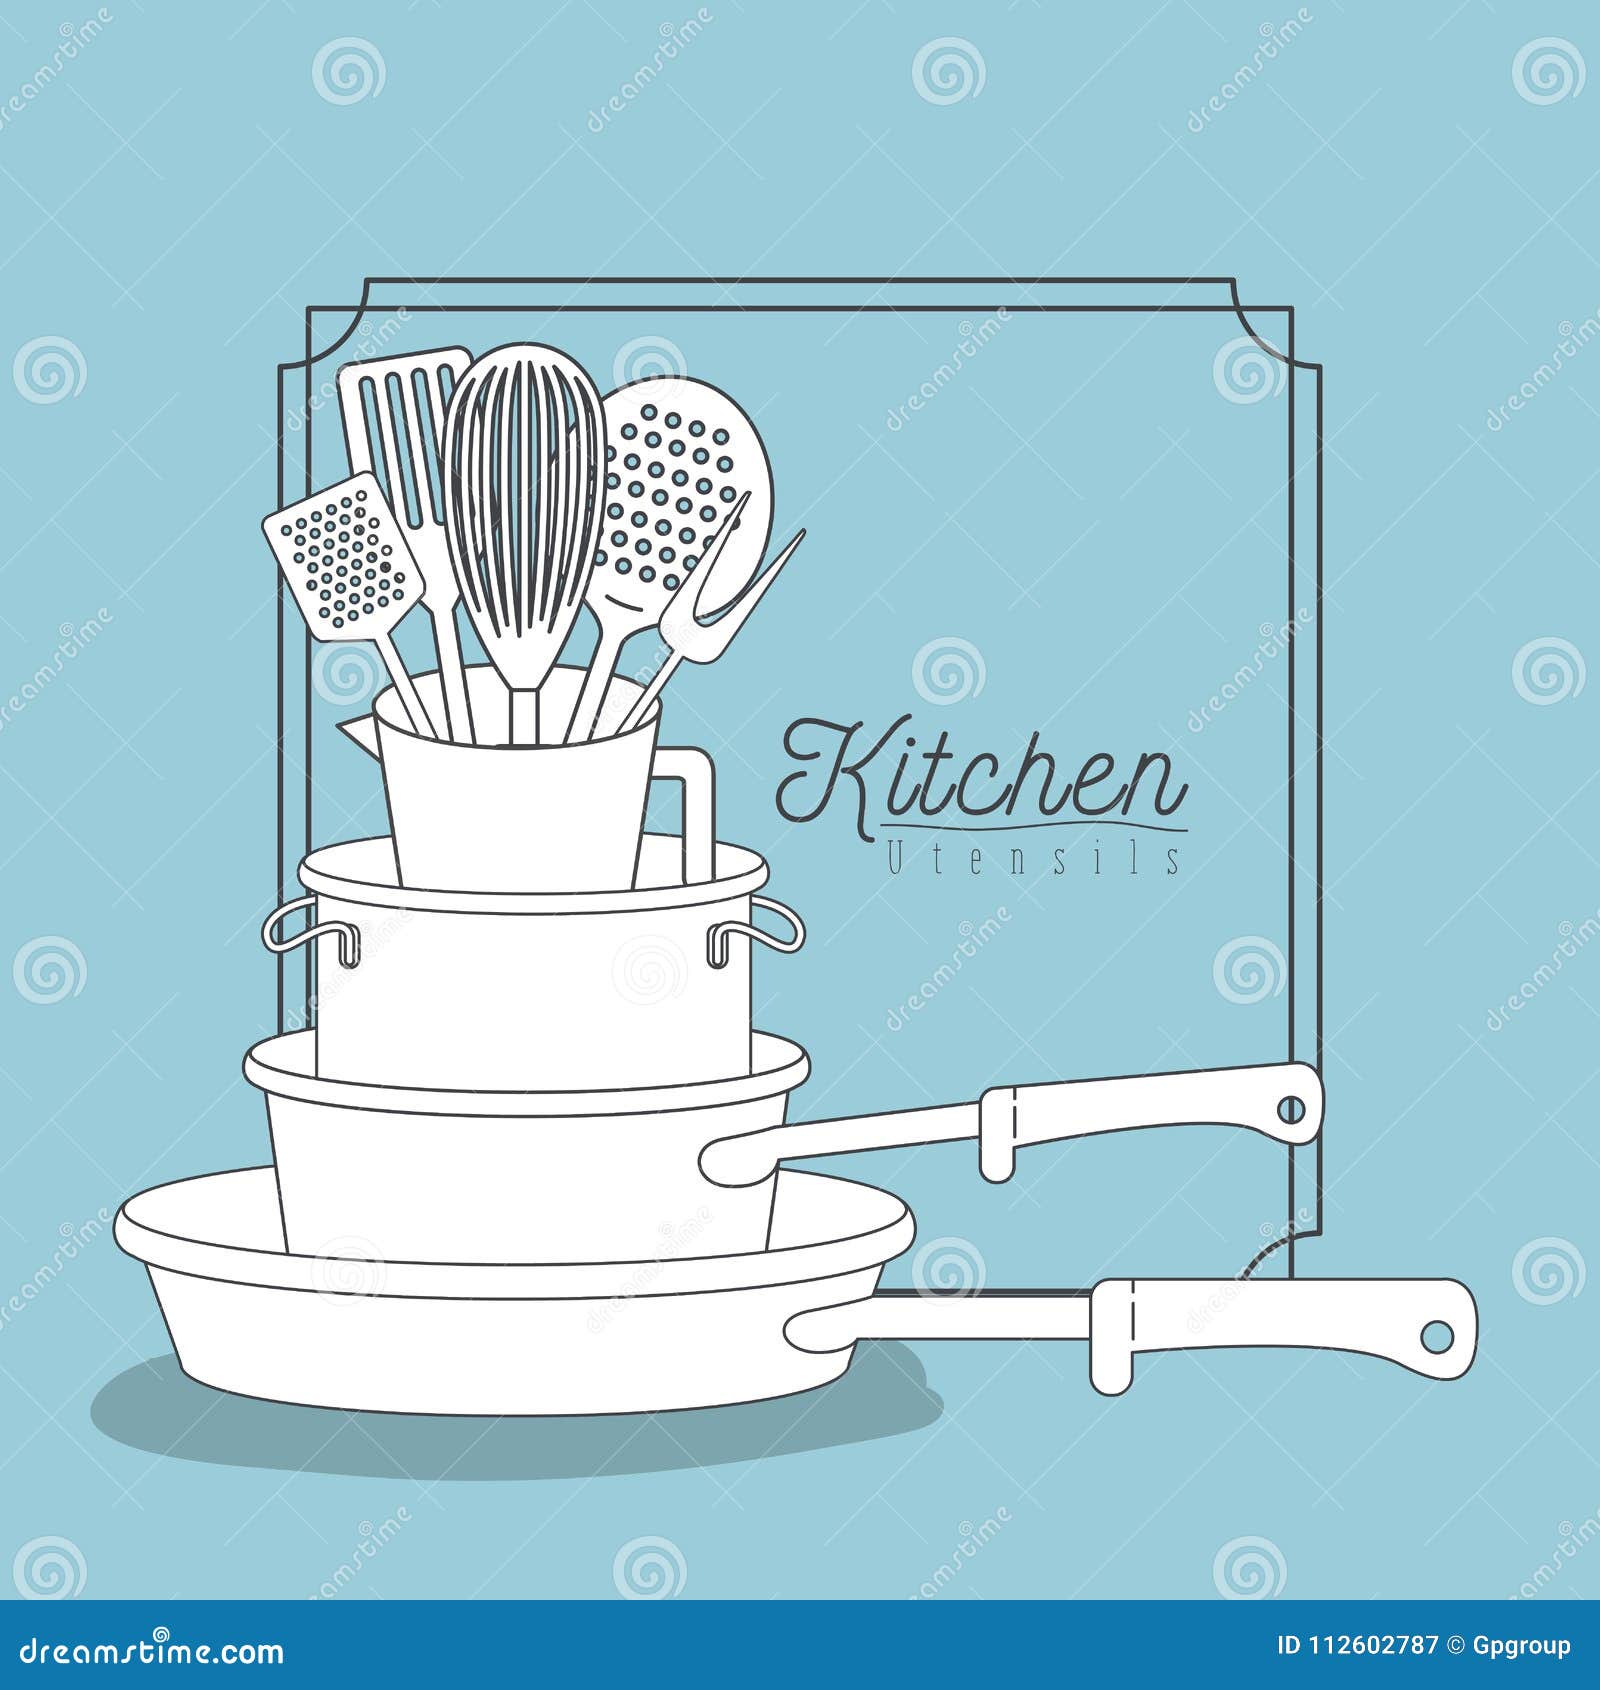 color blue background with decorative frame vintage and set silhouette stack of pots and pans kitchen utensils over